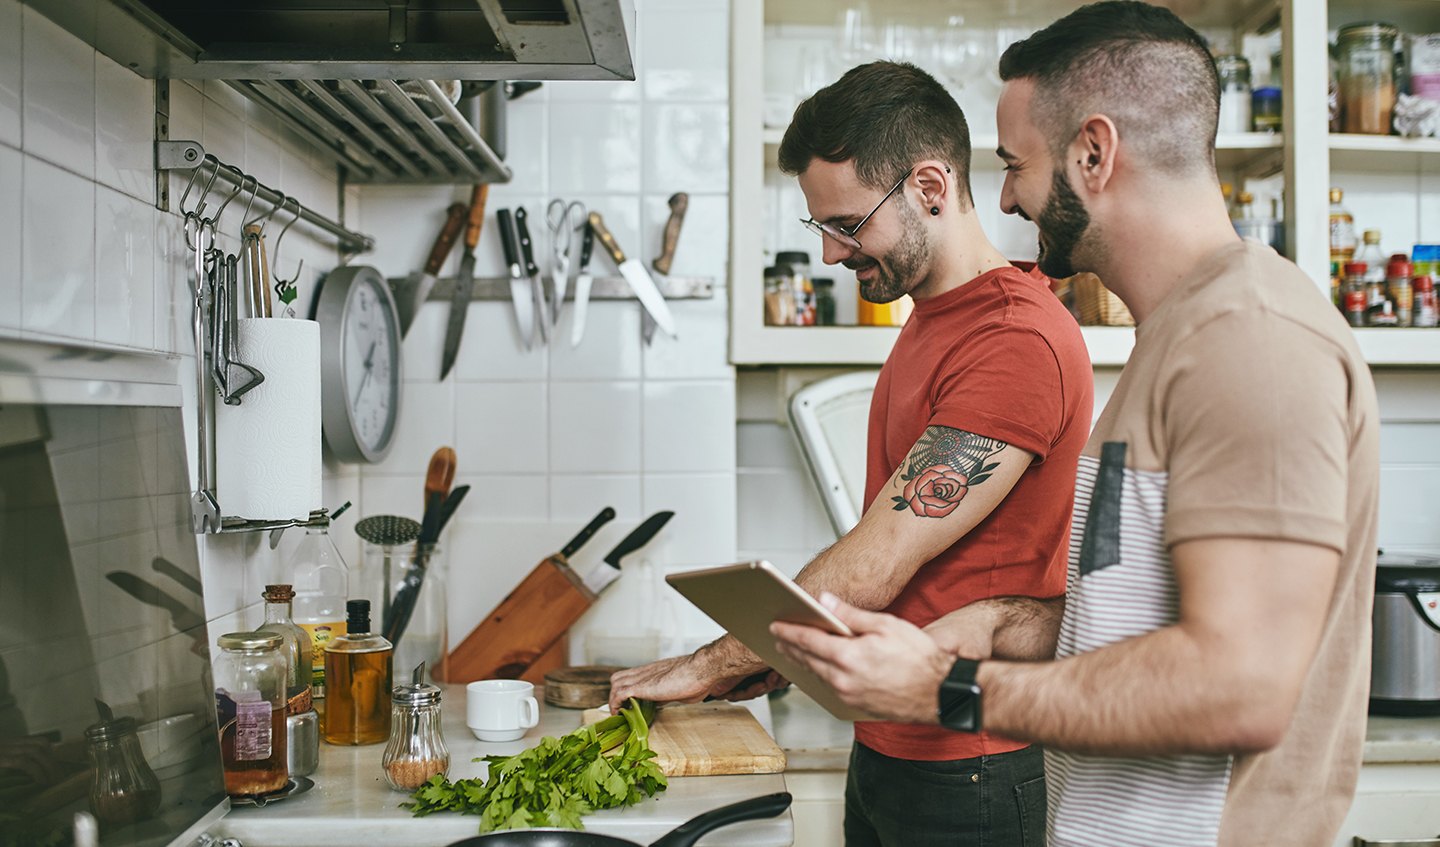 Couple prepping ingredients for healthy cooking